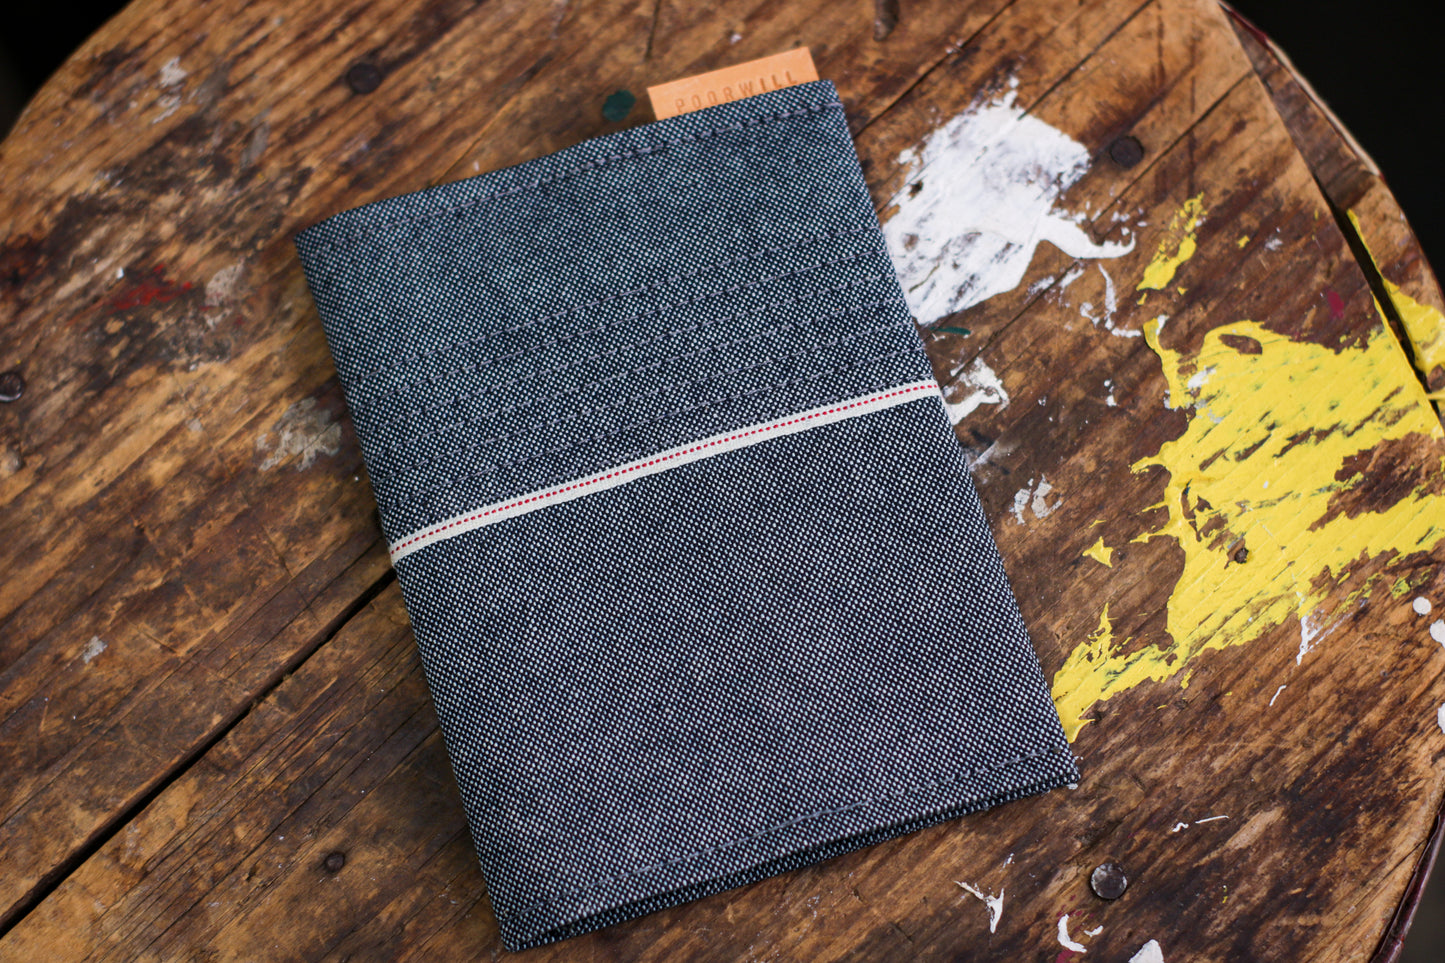 LIL' SELVEDGE NOTEBOOK COVER + NOTEBOOK